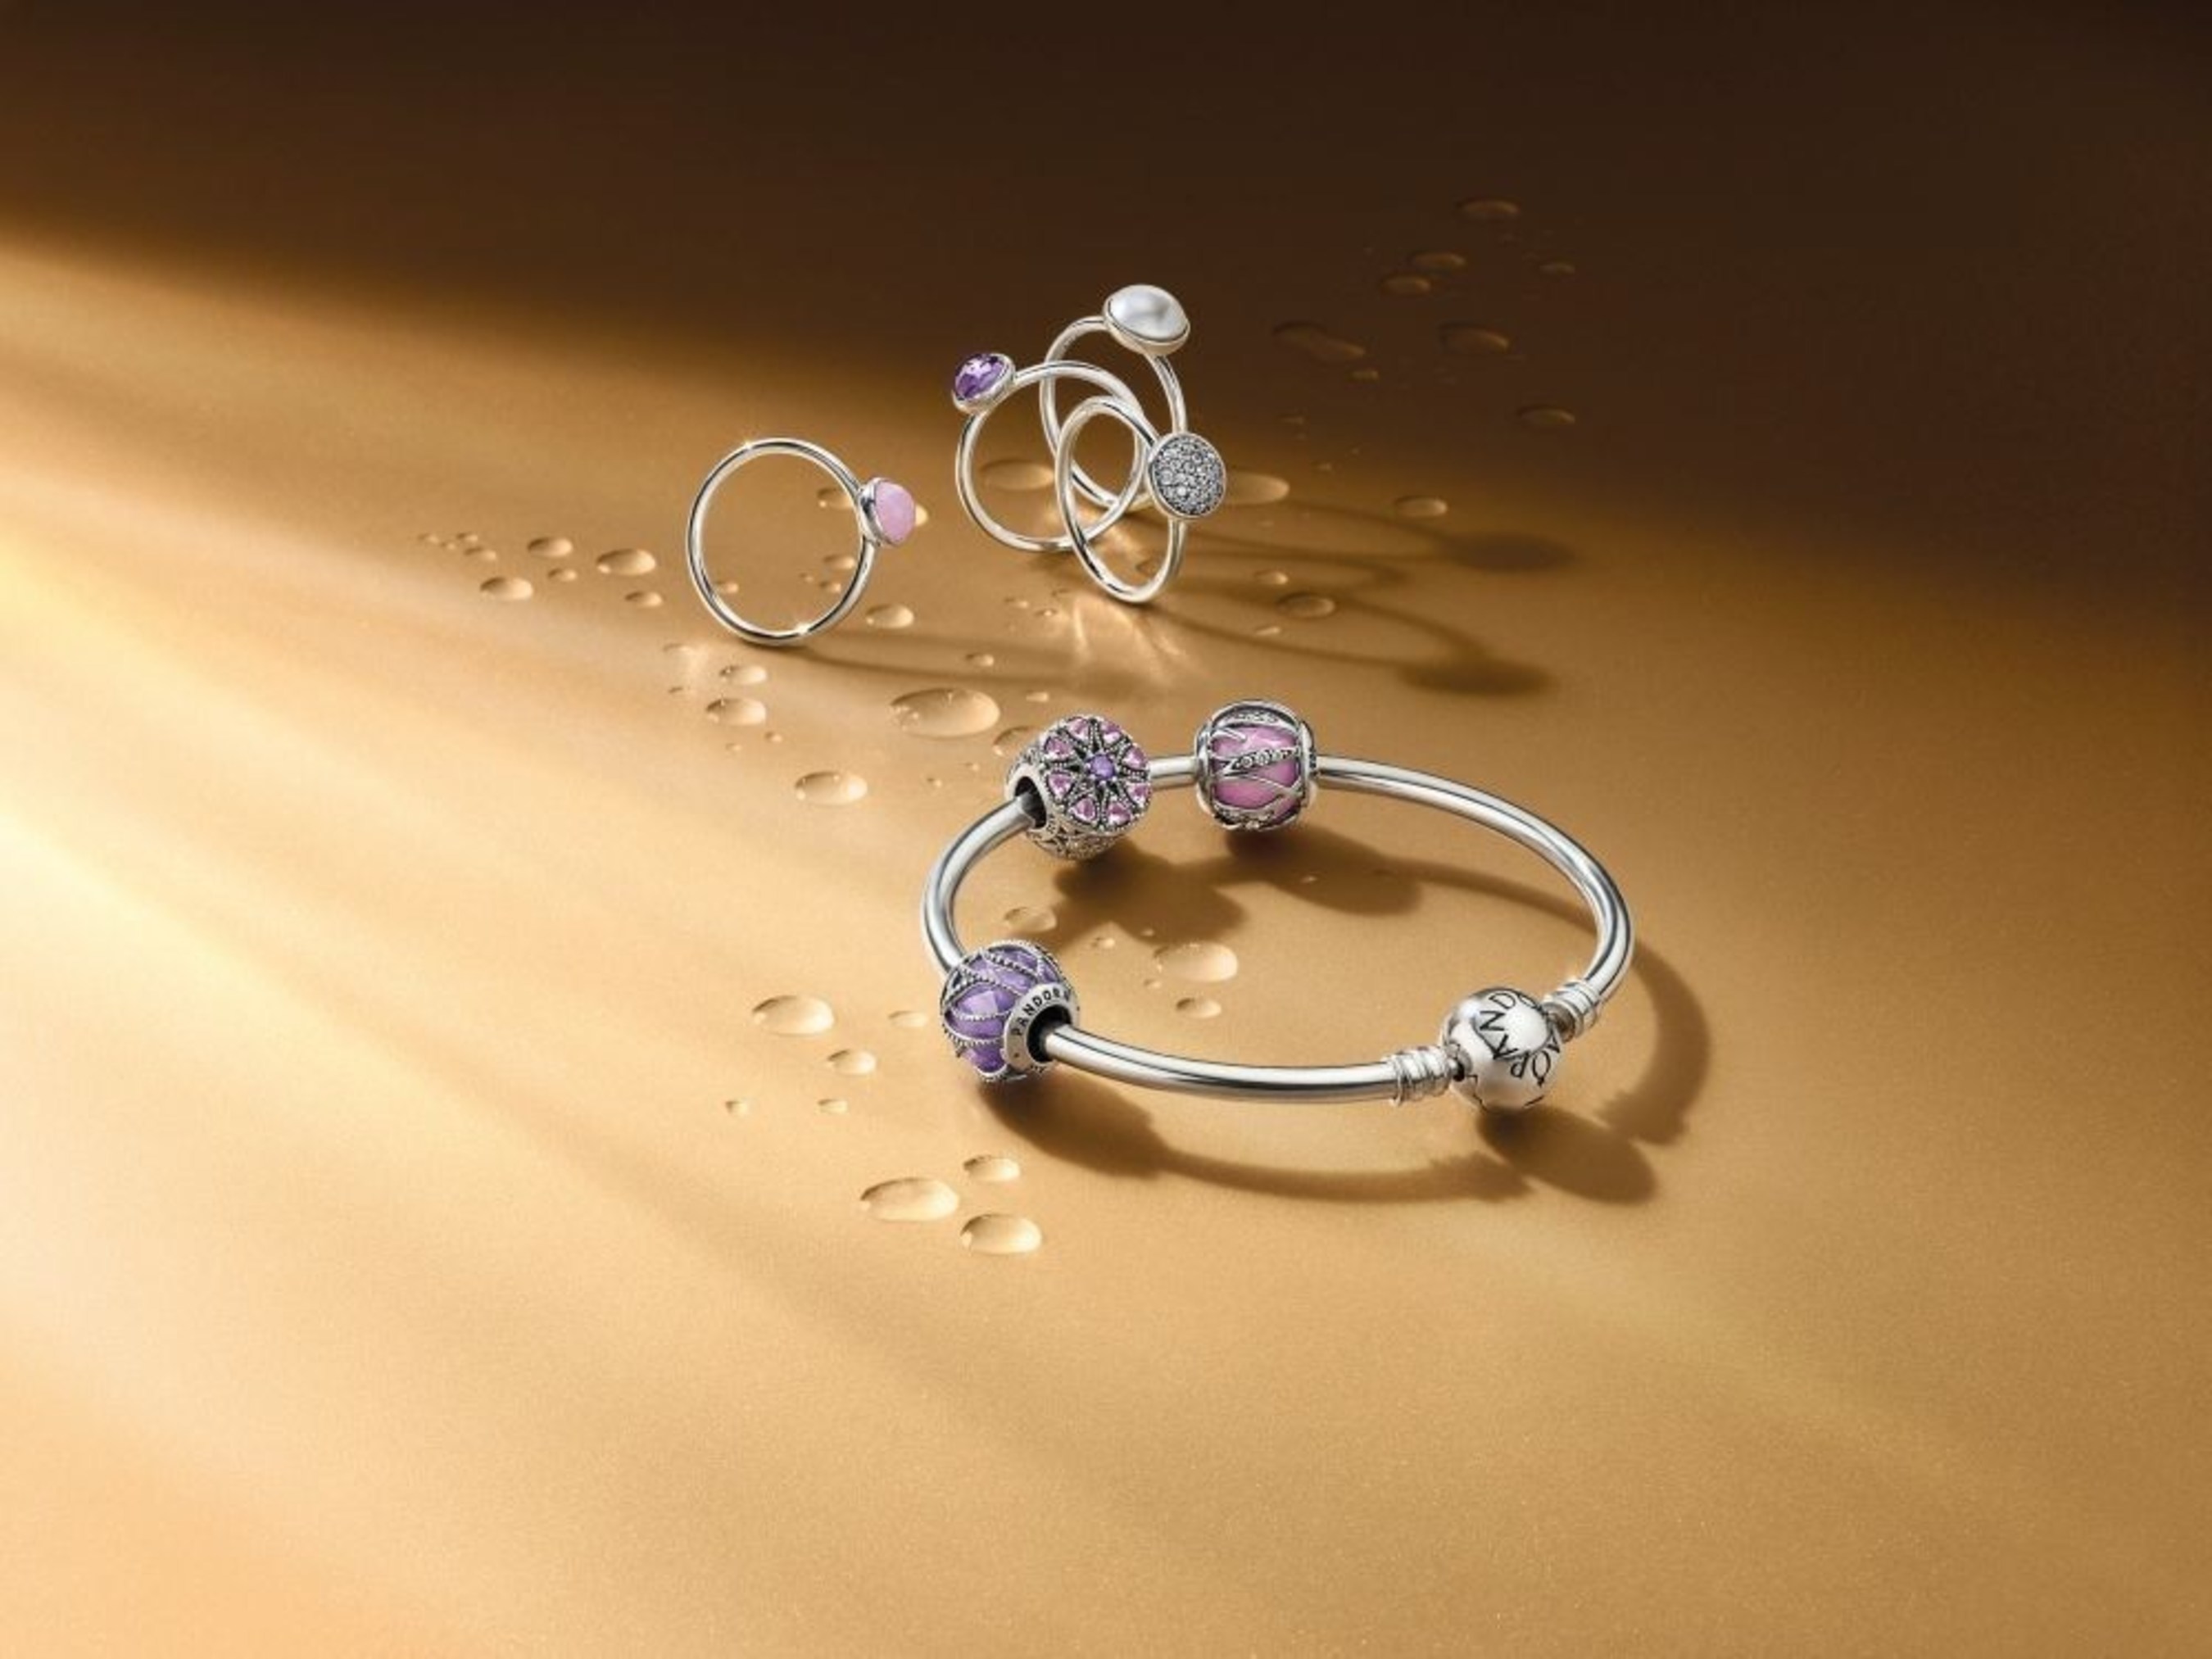 krig flydende kjole PANDORA Jewelry Celebrates The Unique Style Of Every Woman With The  Introduction Of "The Look Of